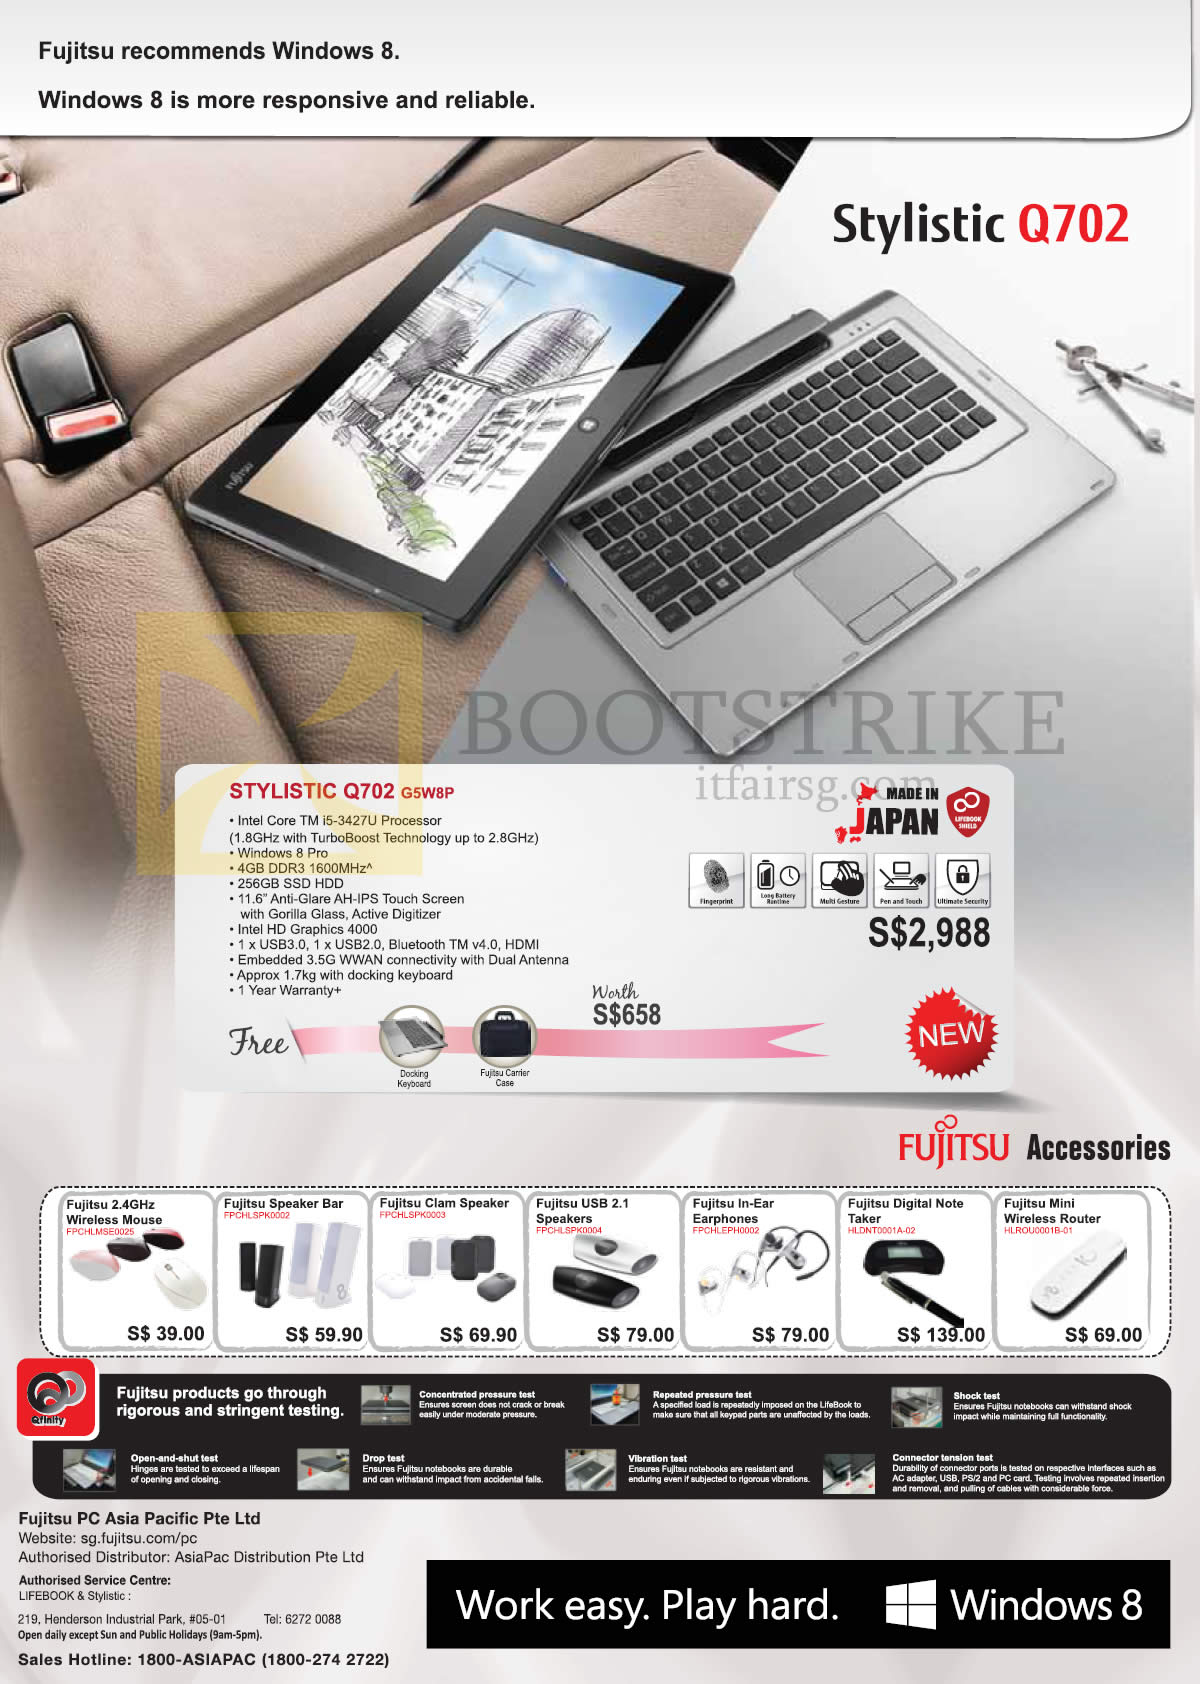 PC SHOW 2013 price list image brochure of Fujitsu (Newstead B6028) Stylistic Q702 G58WP Tablet, Accessories, Mouse, Speakers, Earphones